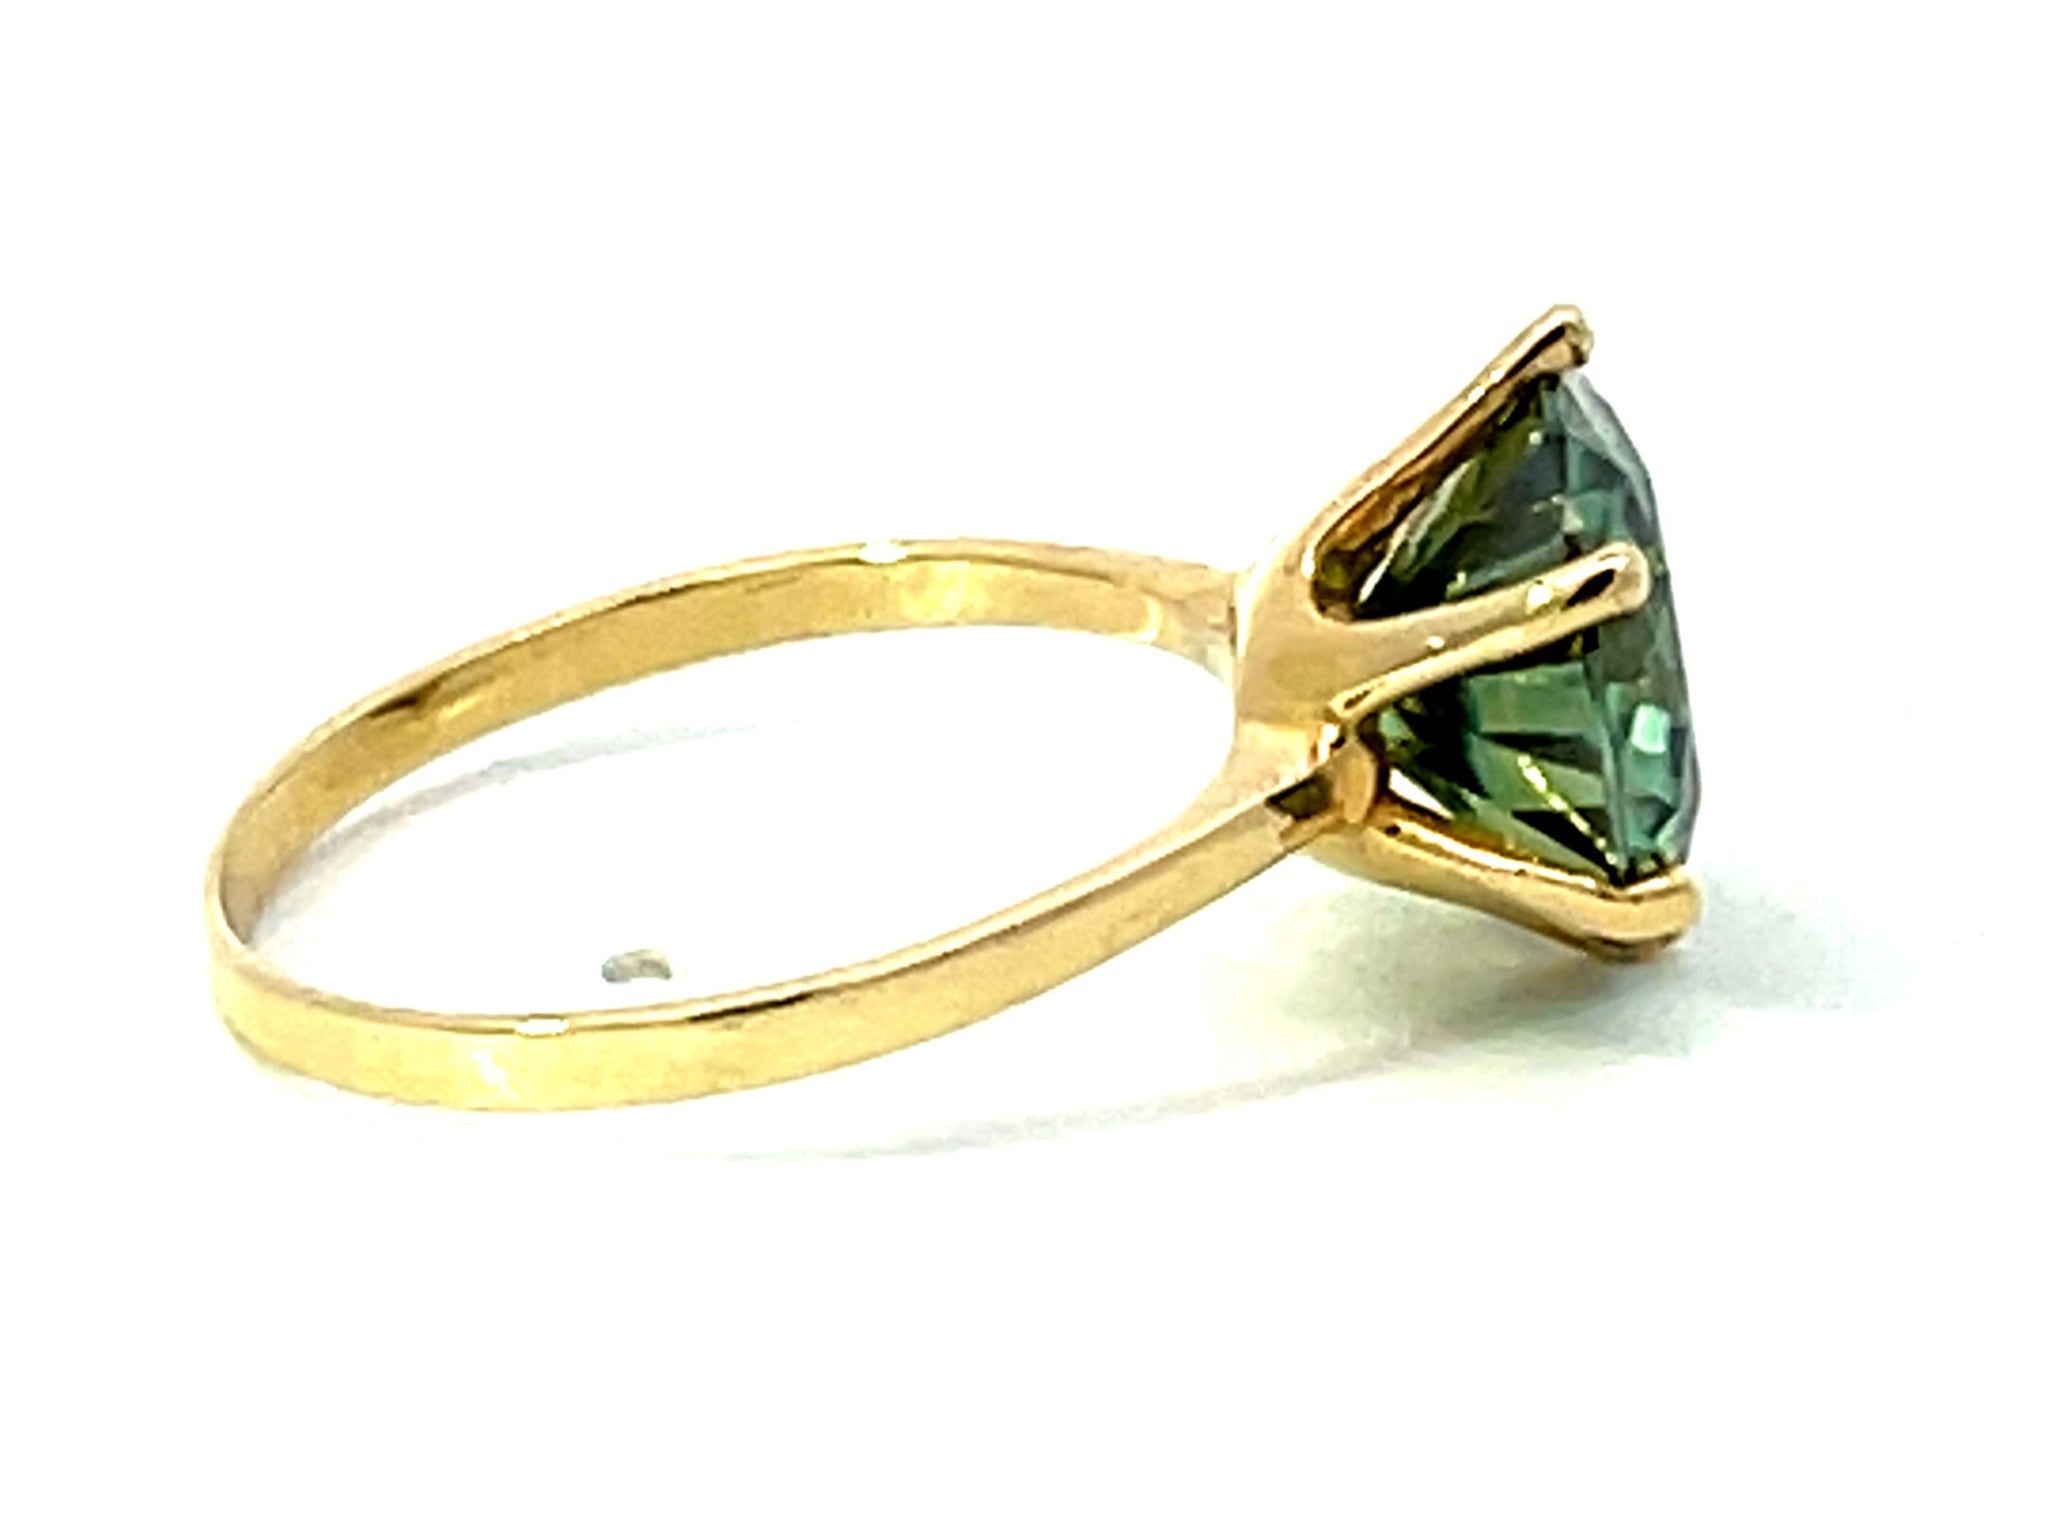 4 Carat Fancy Intense Green Moissanite Solitaire Ring in 14K Yellow Gold